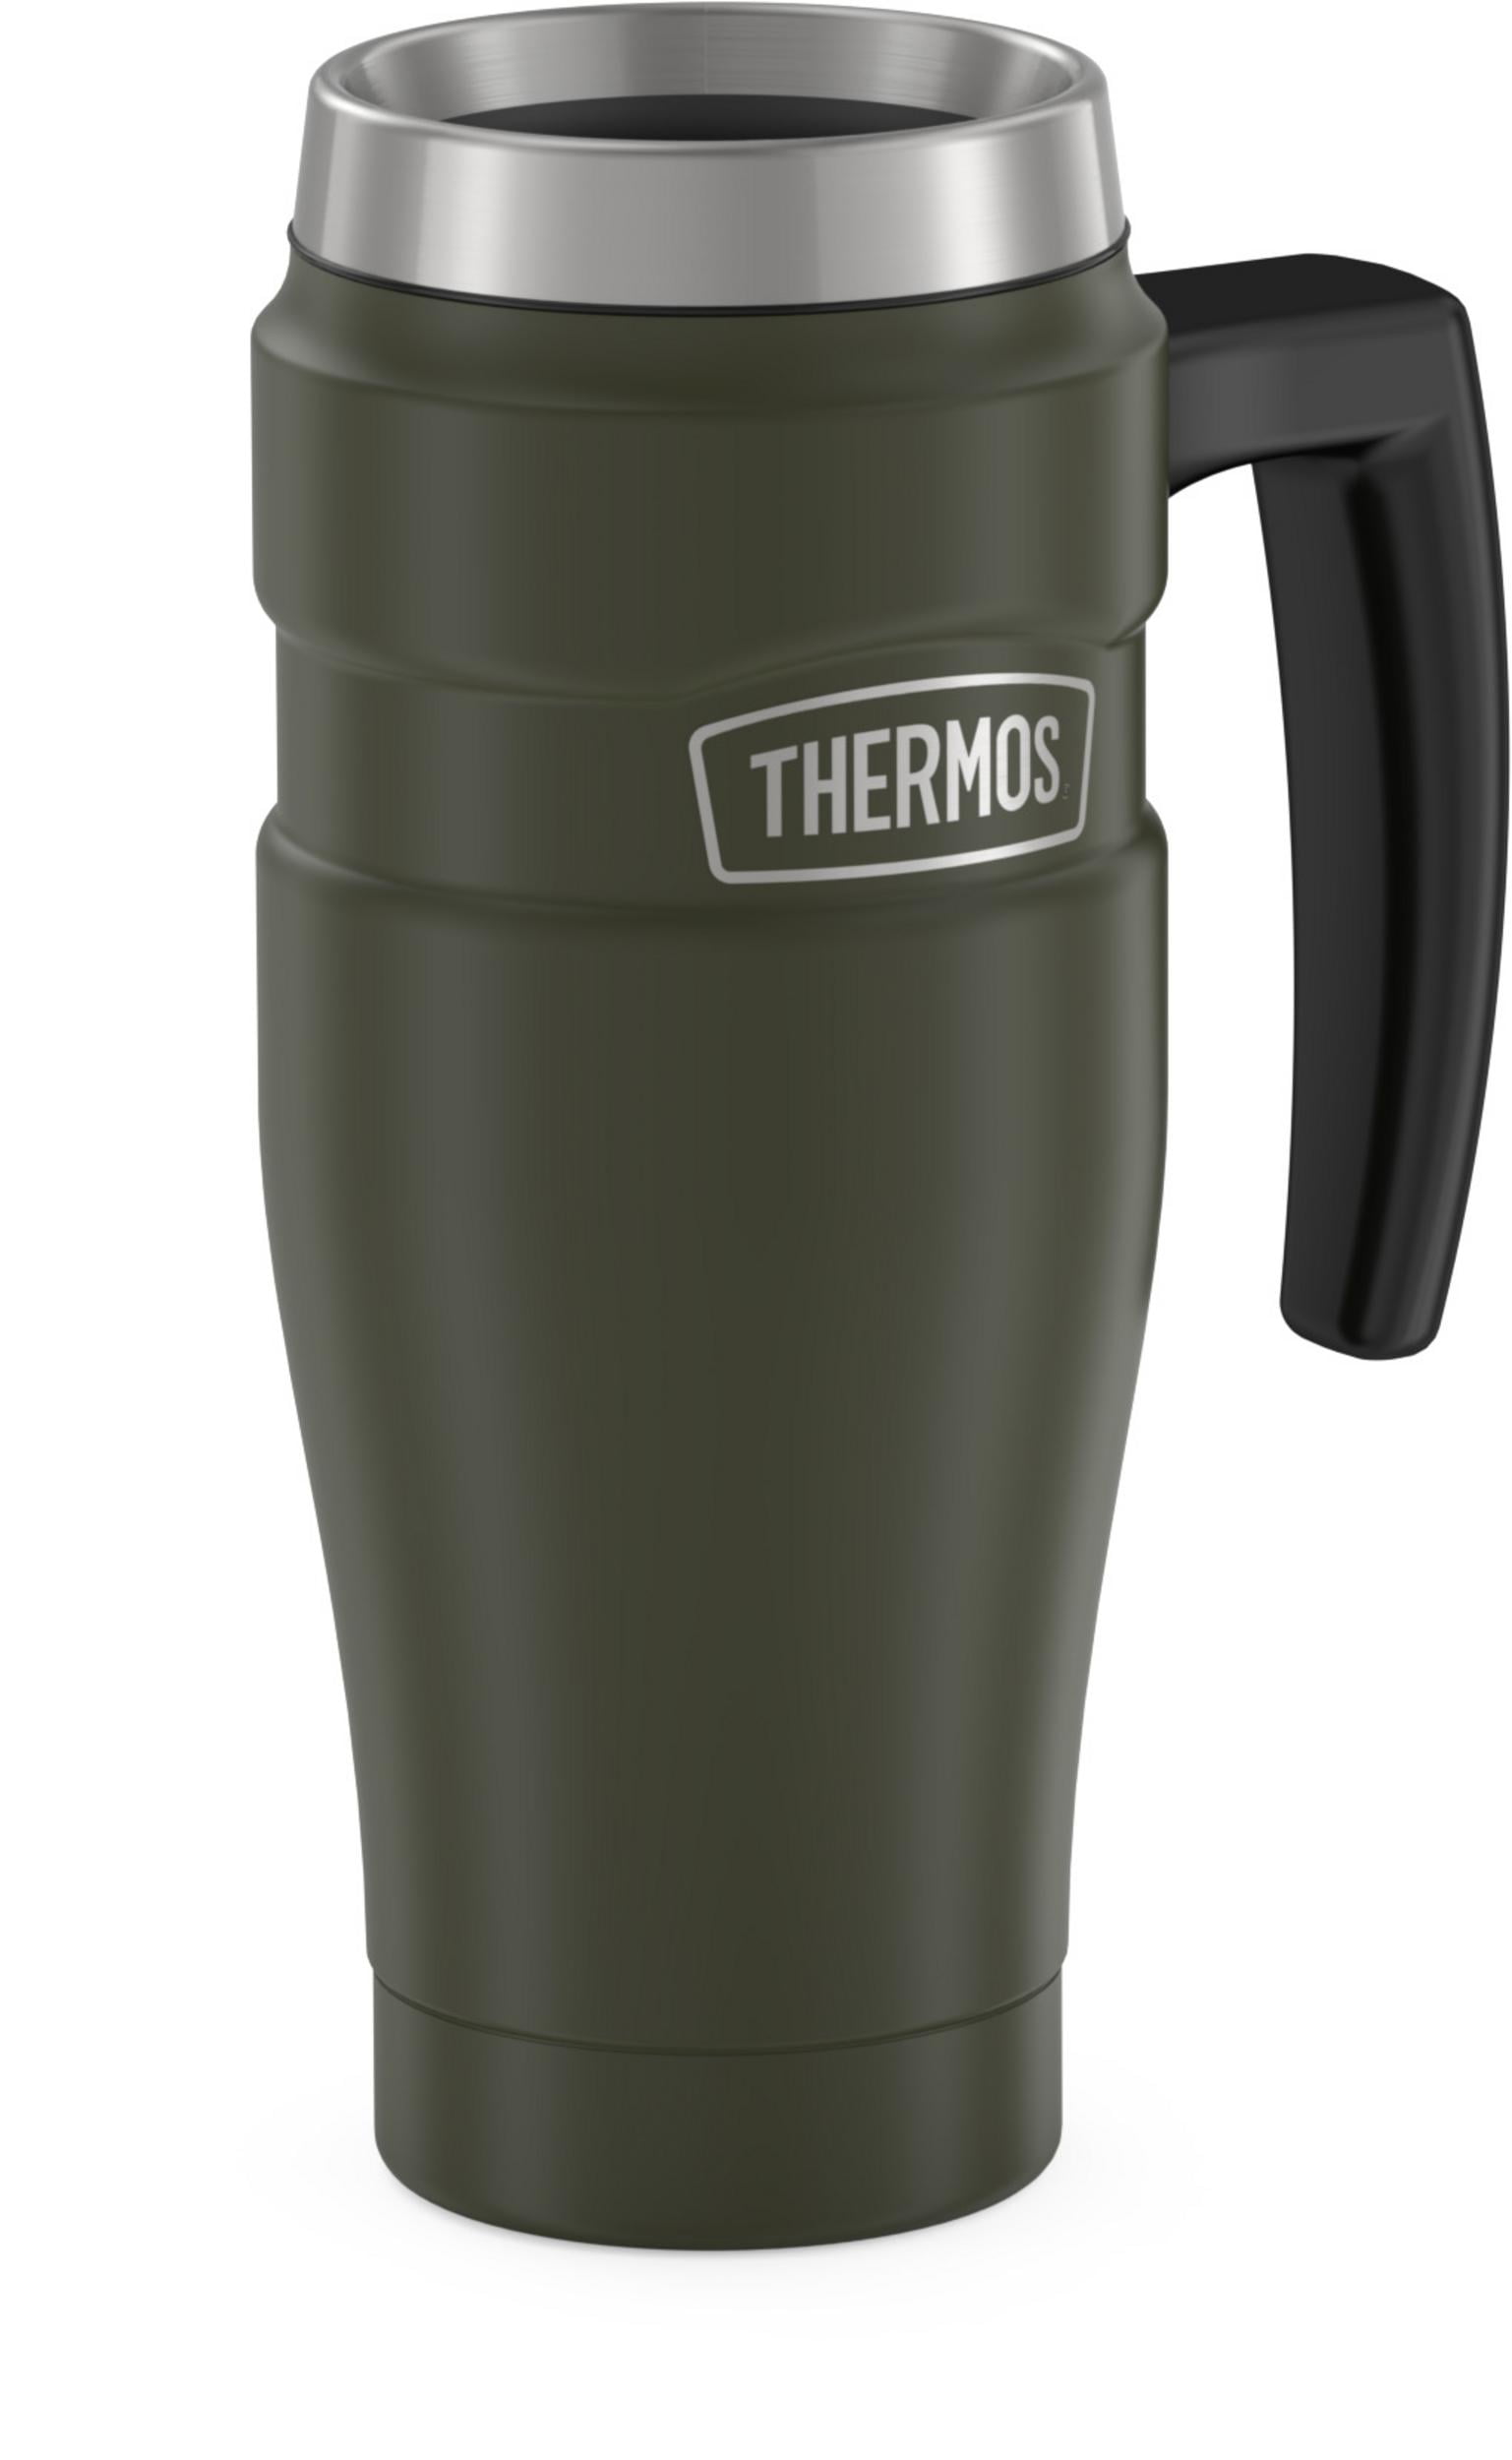 Thermos 16 oz. Stainless King Travel Mug with Handle - Pine Green 